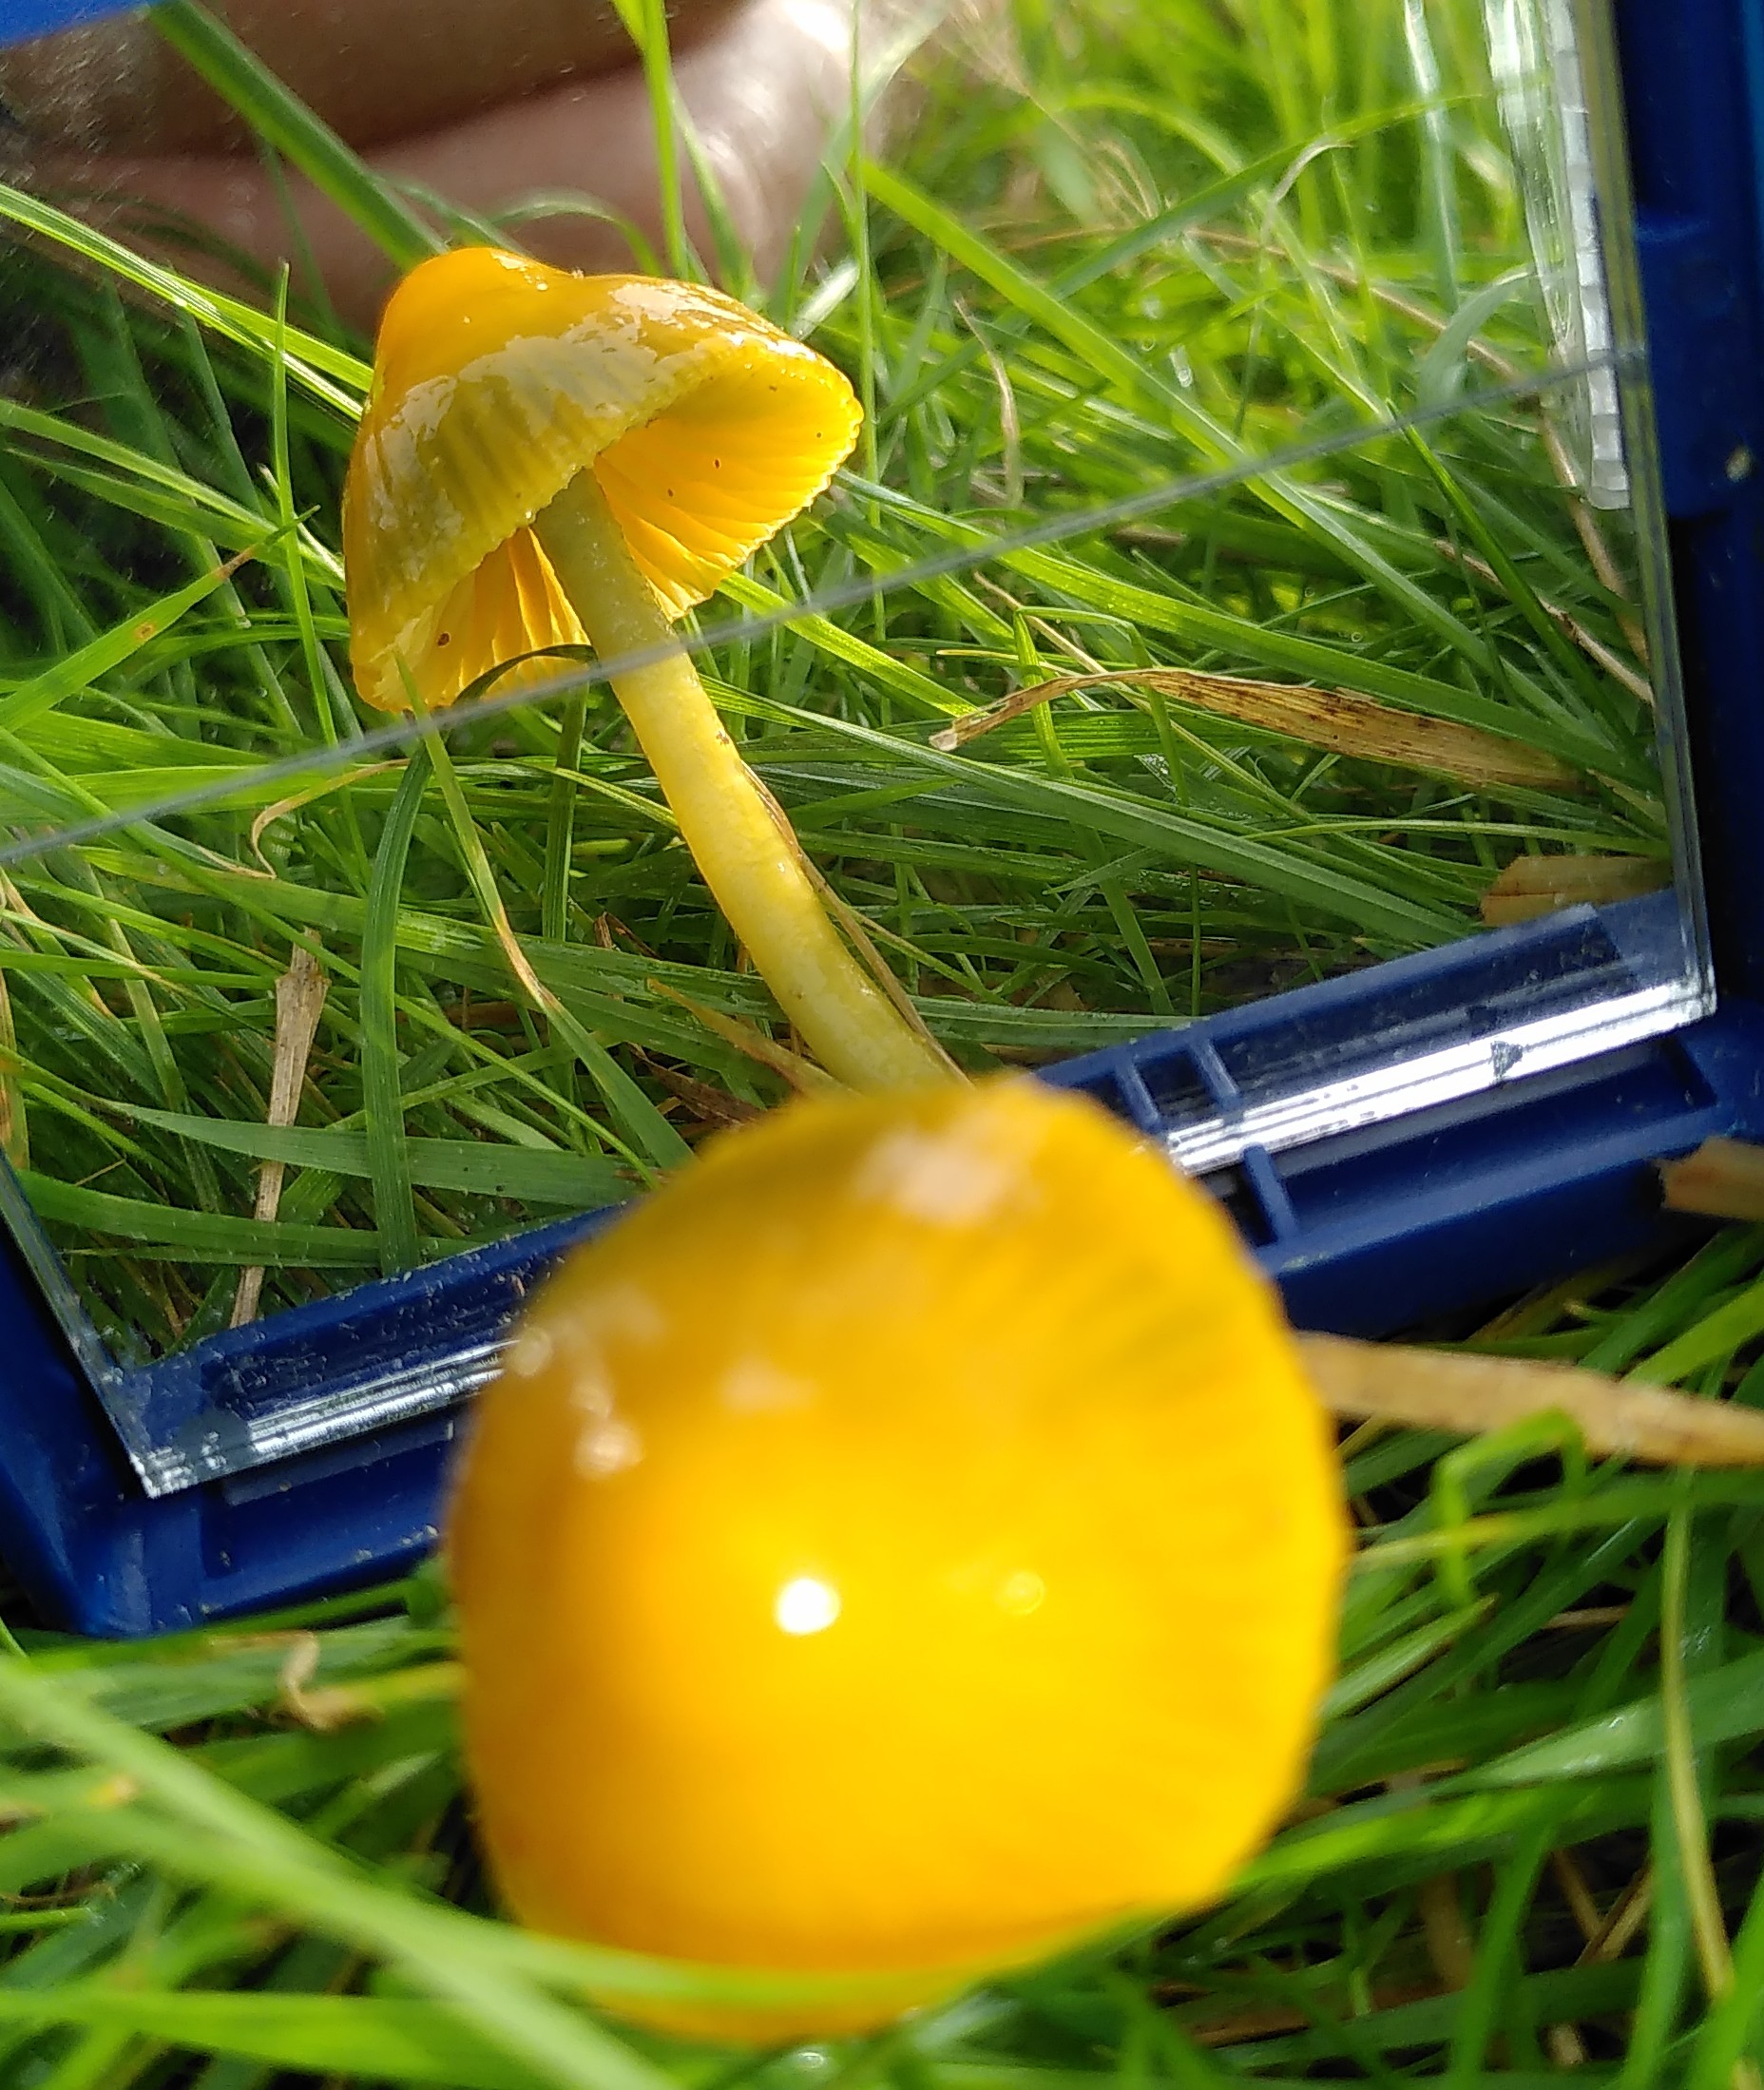 Parrot Waxcap(?), Stainforth, 17 Oct 23